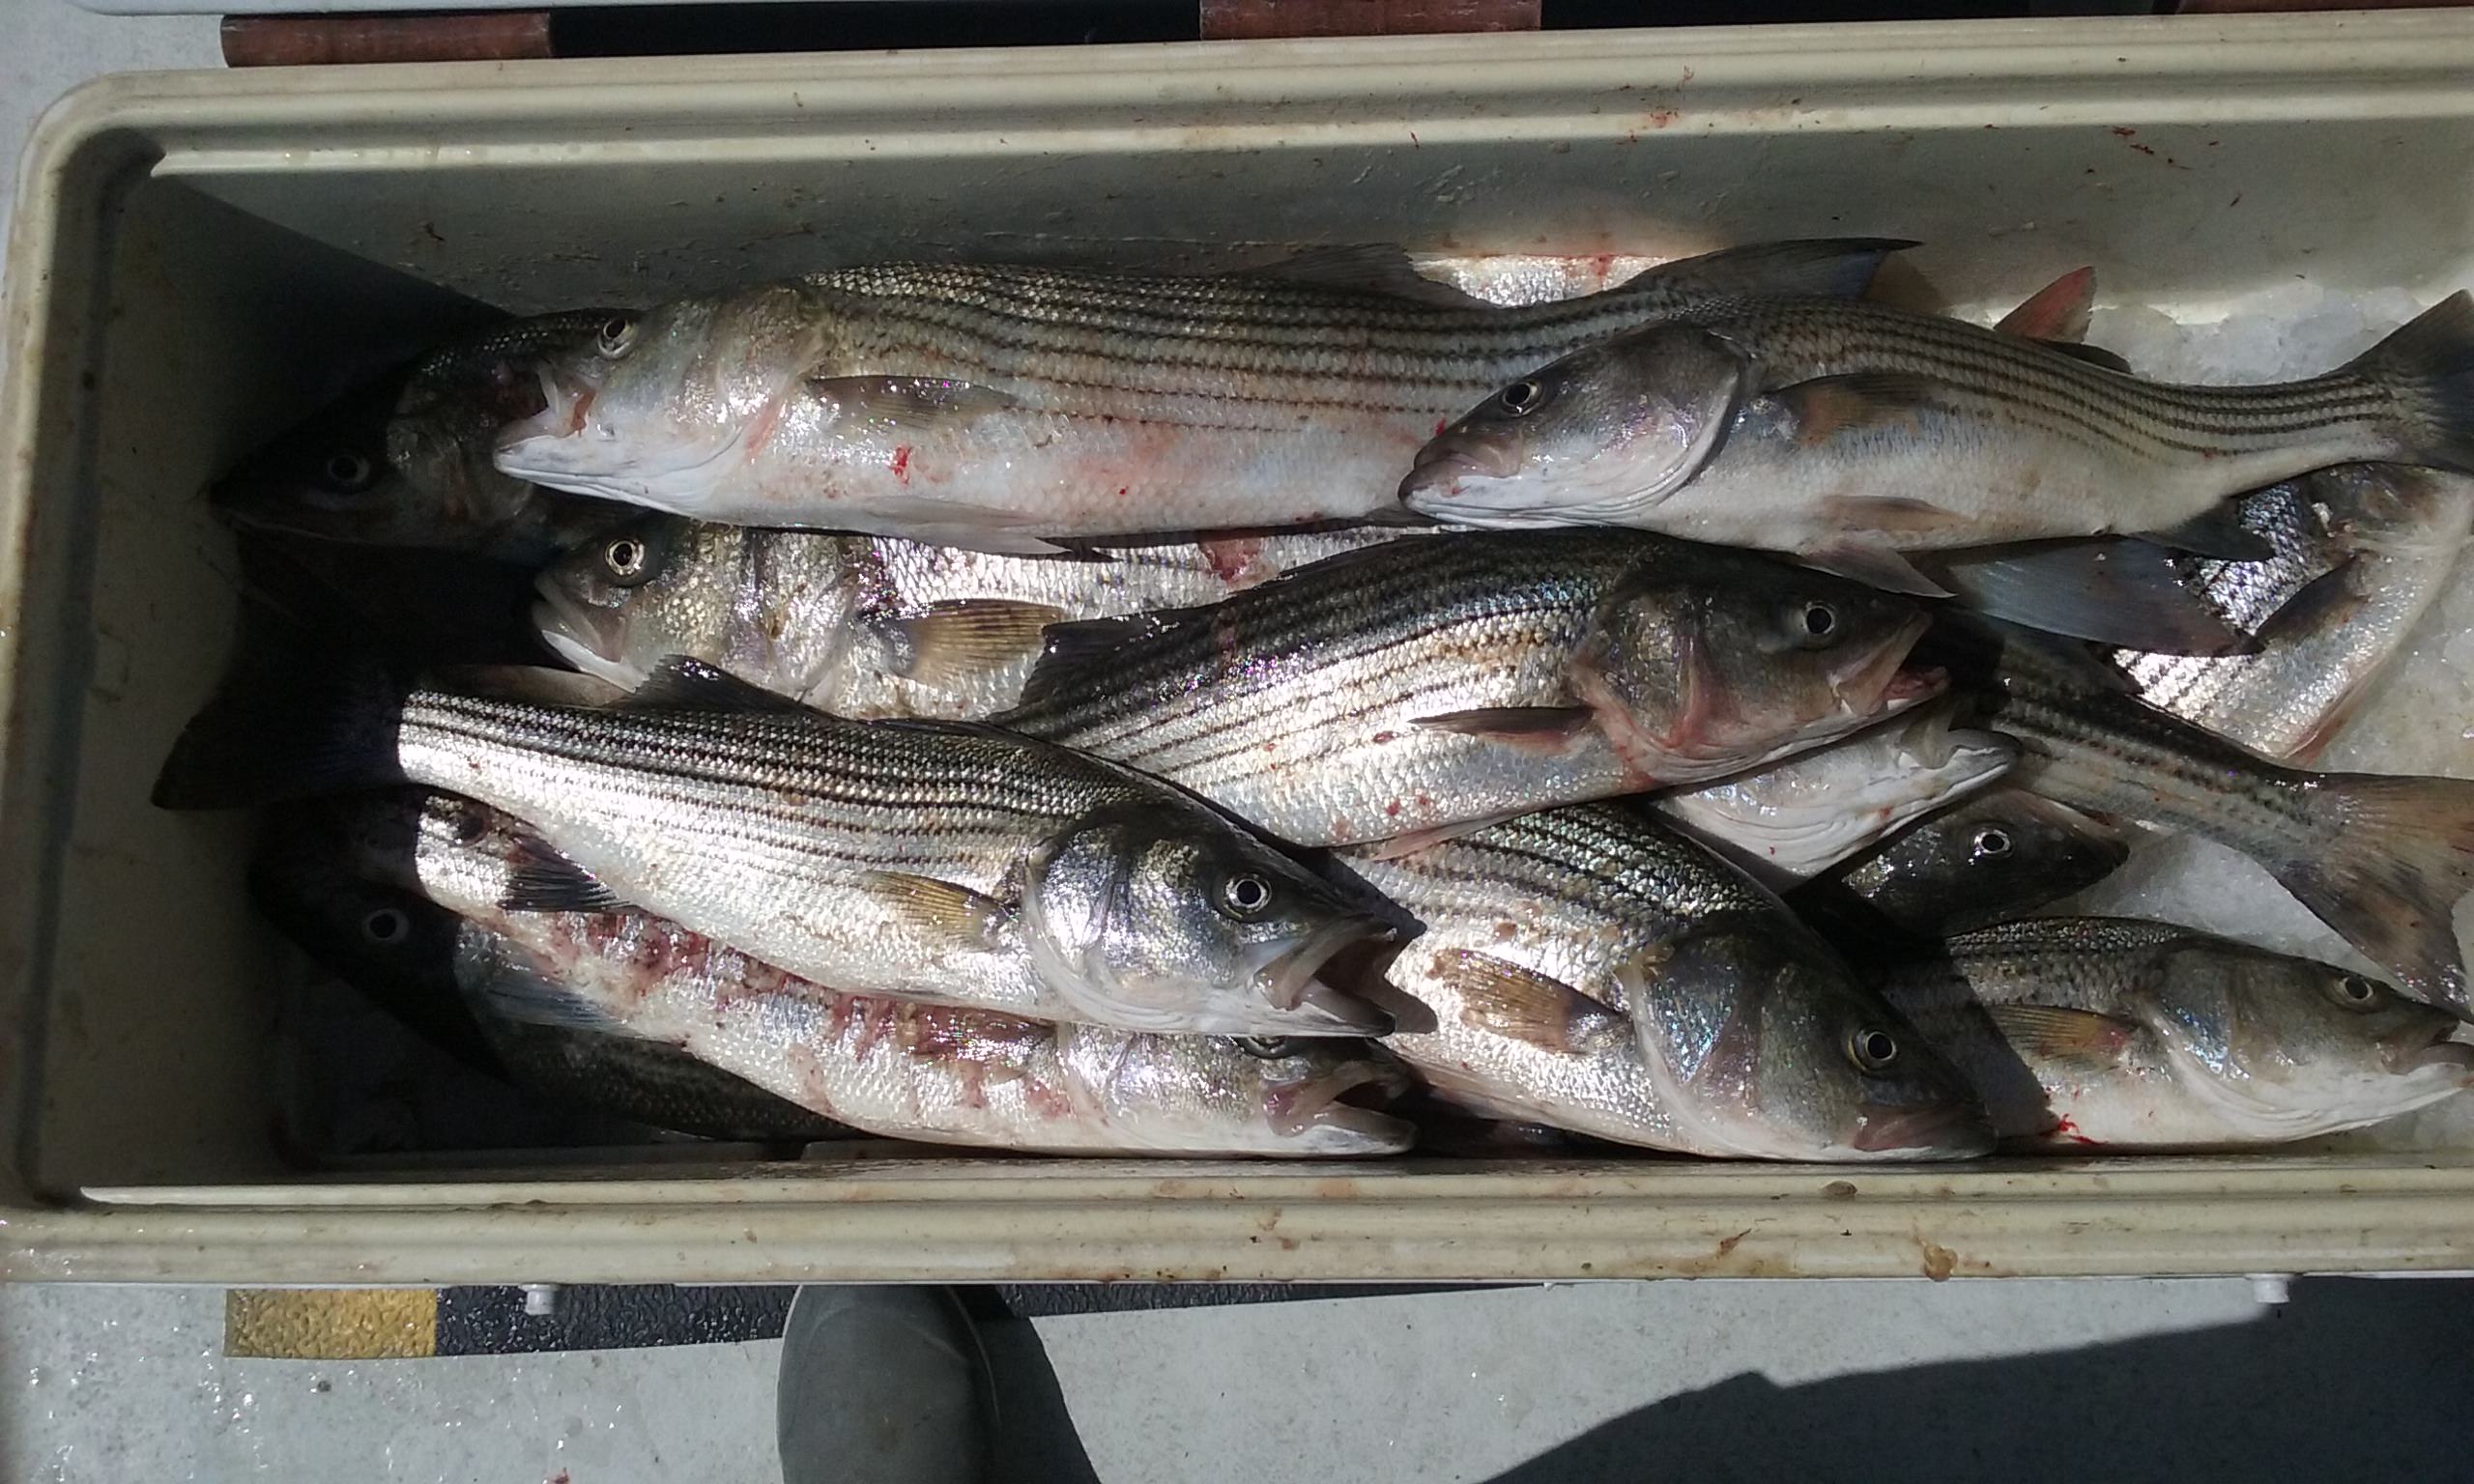 More Striped Bass Caught With Light Tackle!